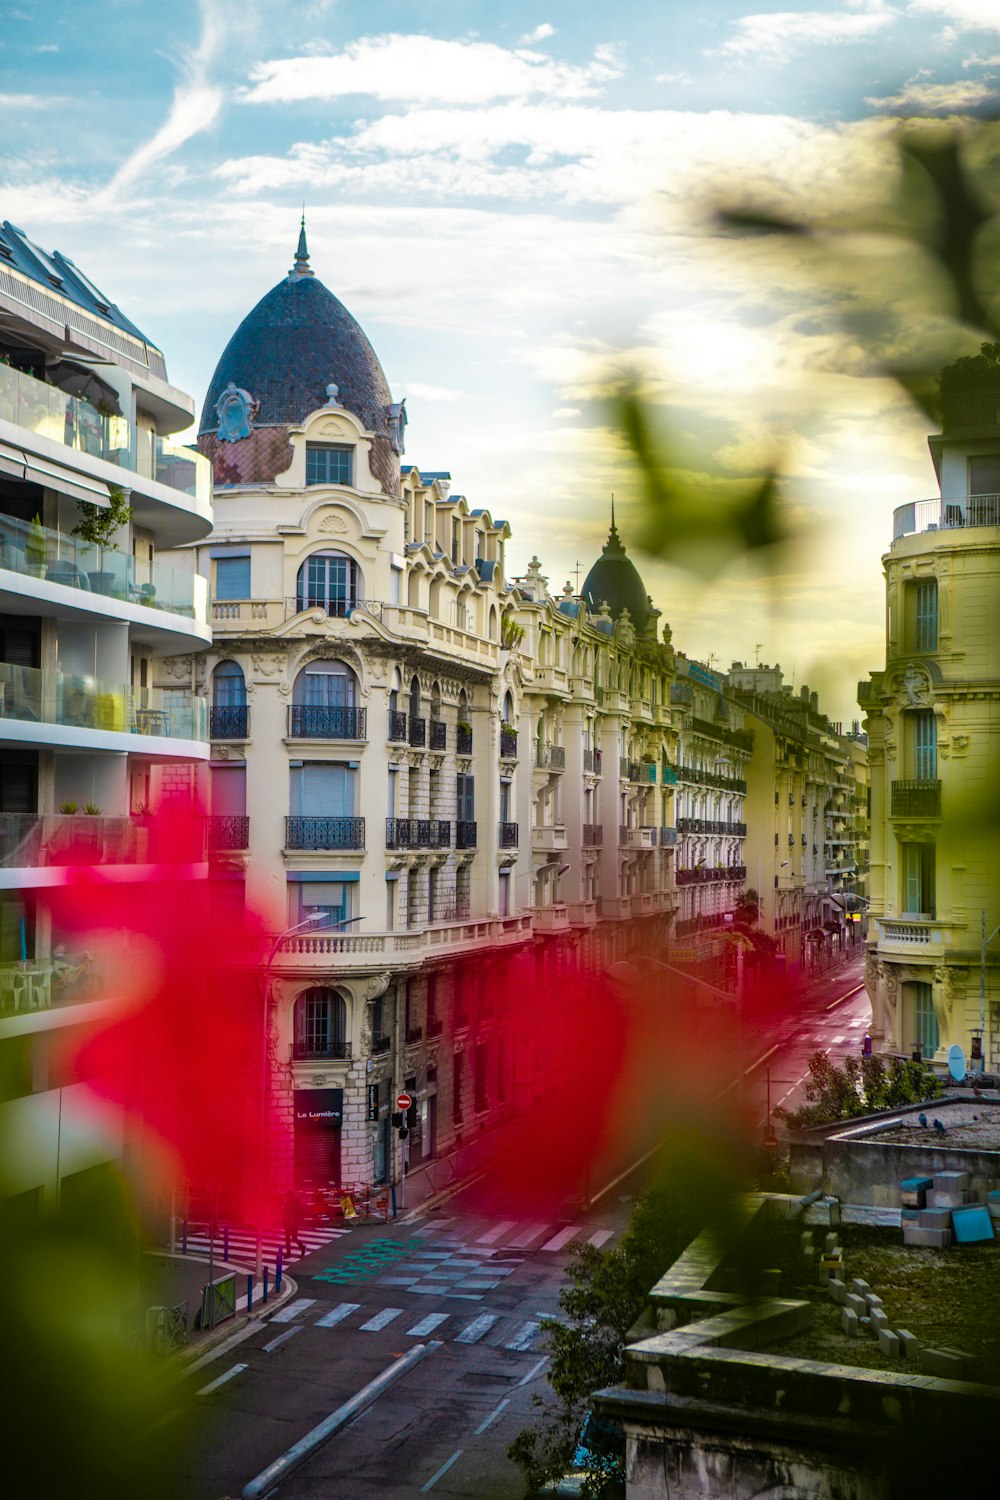 a blurry photo of a building with a red flower in the foreground